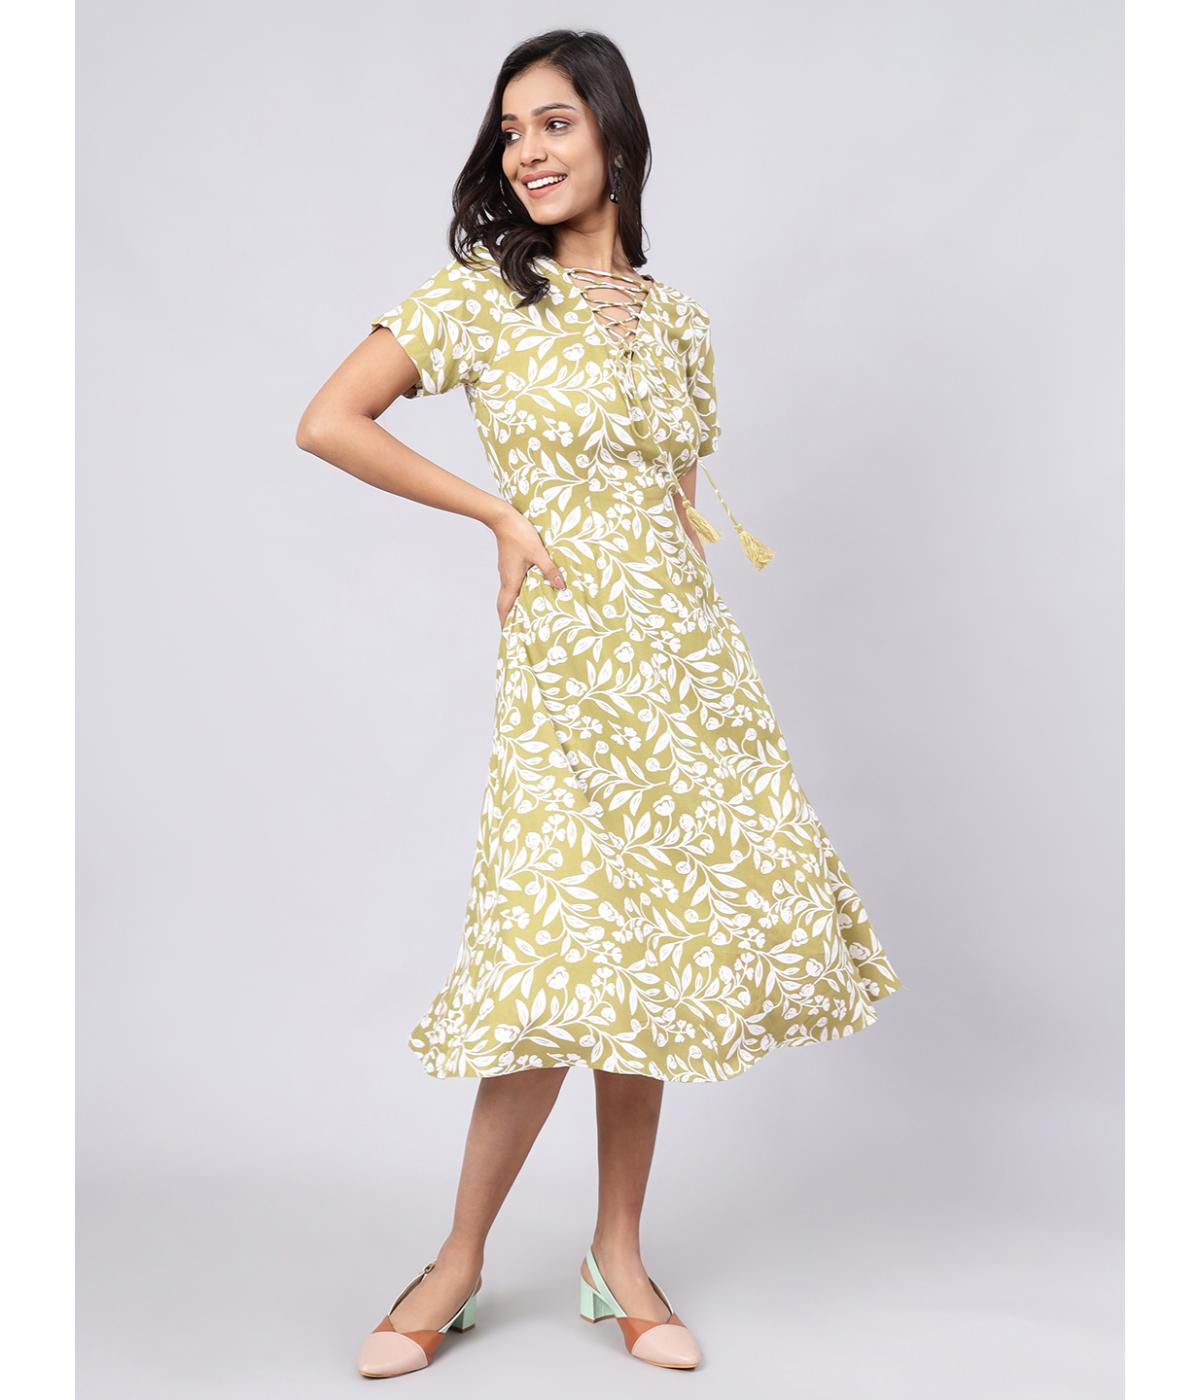 Daevish New Rayon Leaf Printed A-line Dress for Women & Girl's 